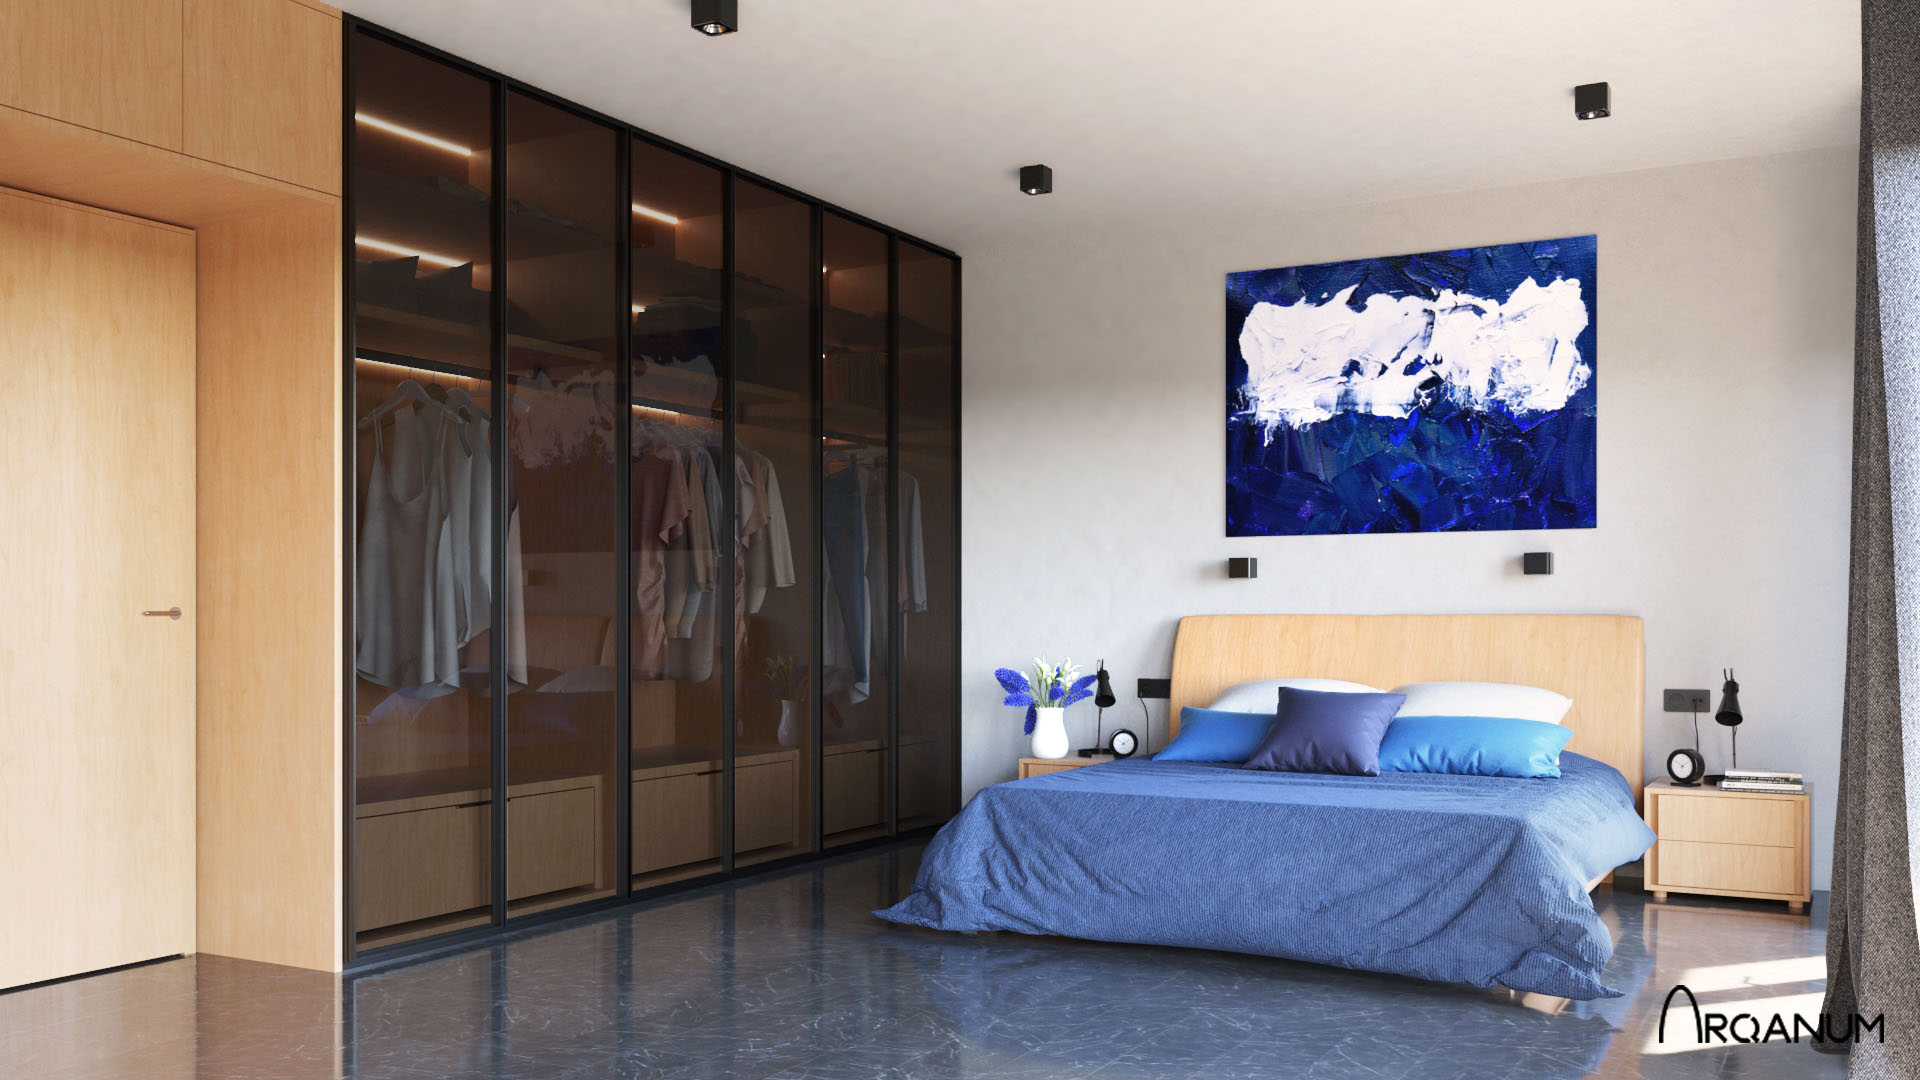 Two residential buildings in Valencia, bedroom